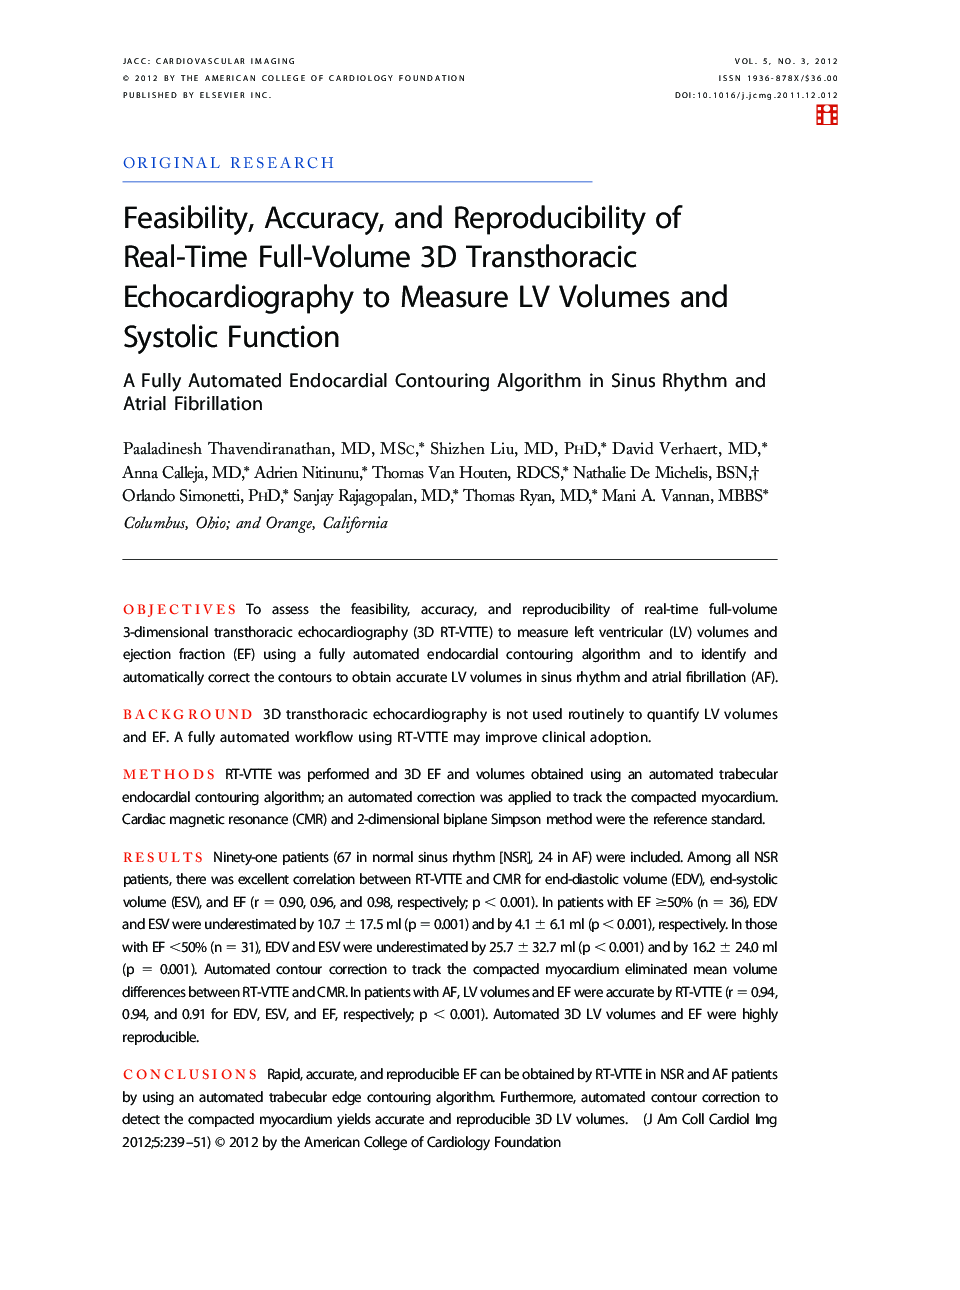 Feasibility, Accuracy, and Reproducibility of Real-Time Full-Volume 3D Transthoracic Echocardiography to Measure LV Volumes and Systolic Function : A Fully Automated Endocardial Contouring Algorithm in Sinus Rhythm and Atrial Fibrillation